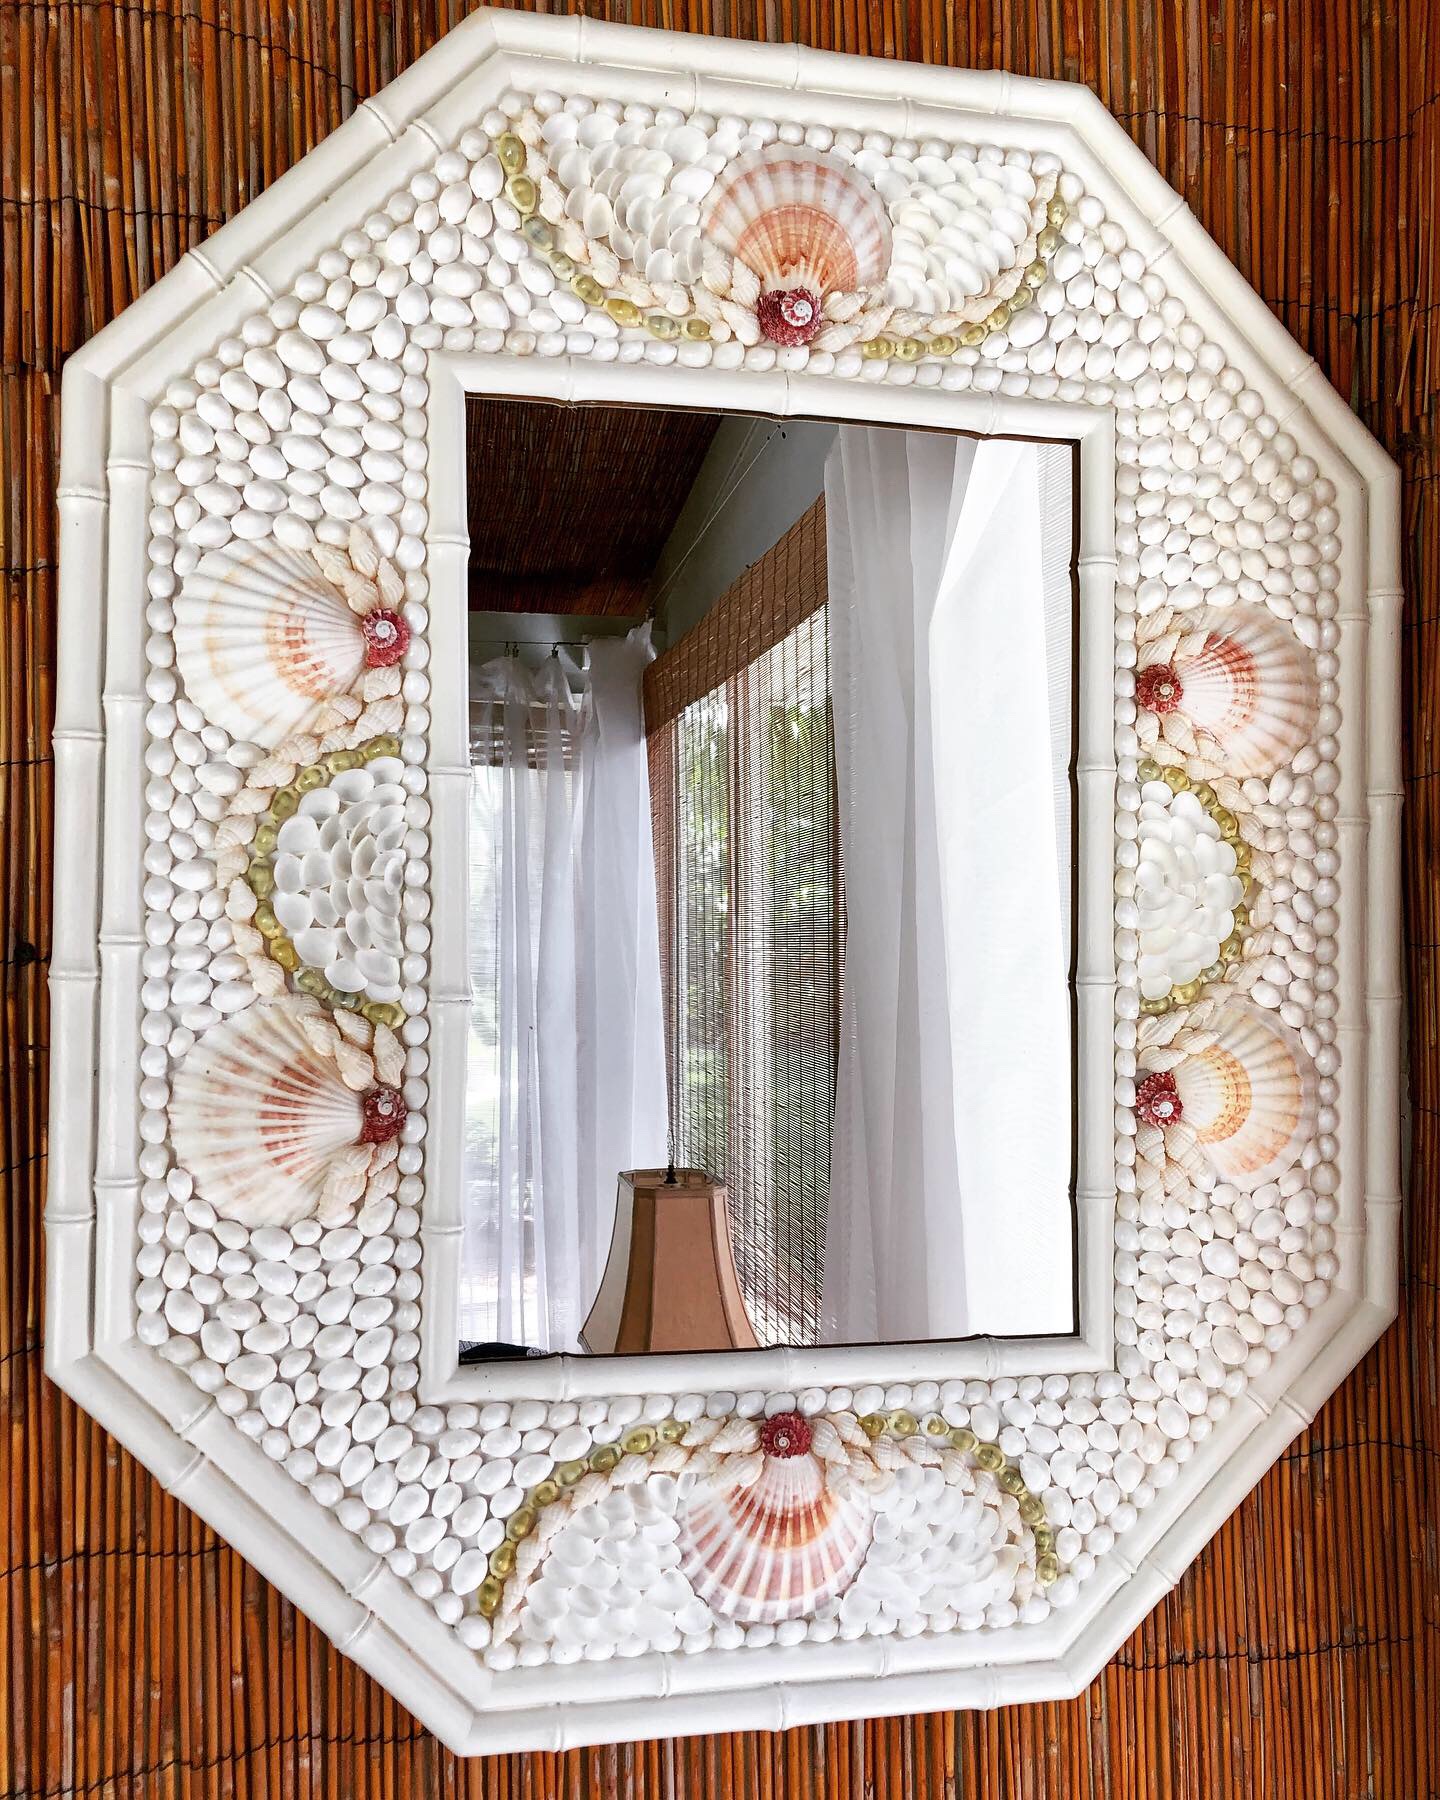 Mirror made from faux bamboo is painted white and has lots of shells placed in bridged patterns. It reflects a window with shear white curtains.